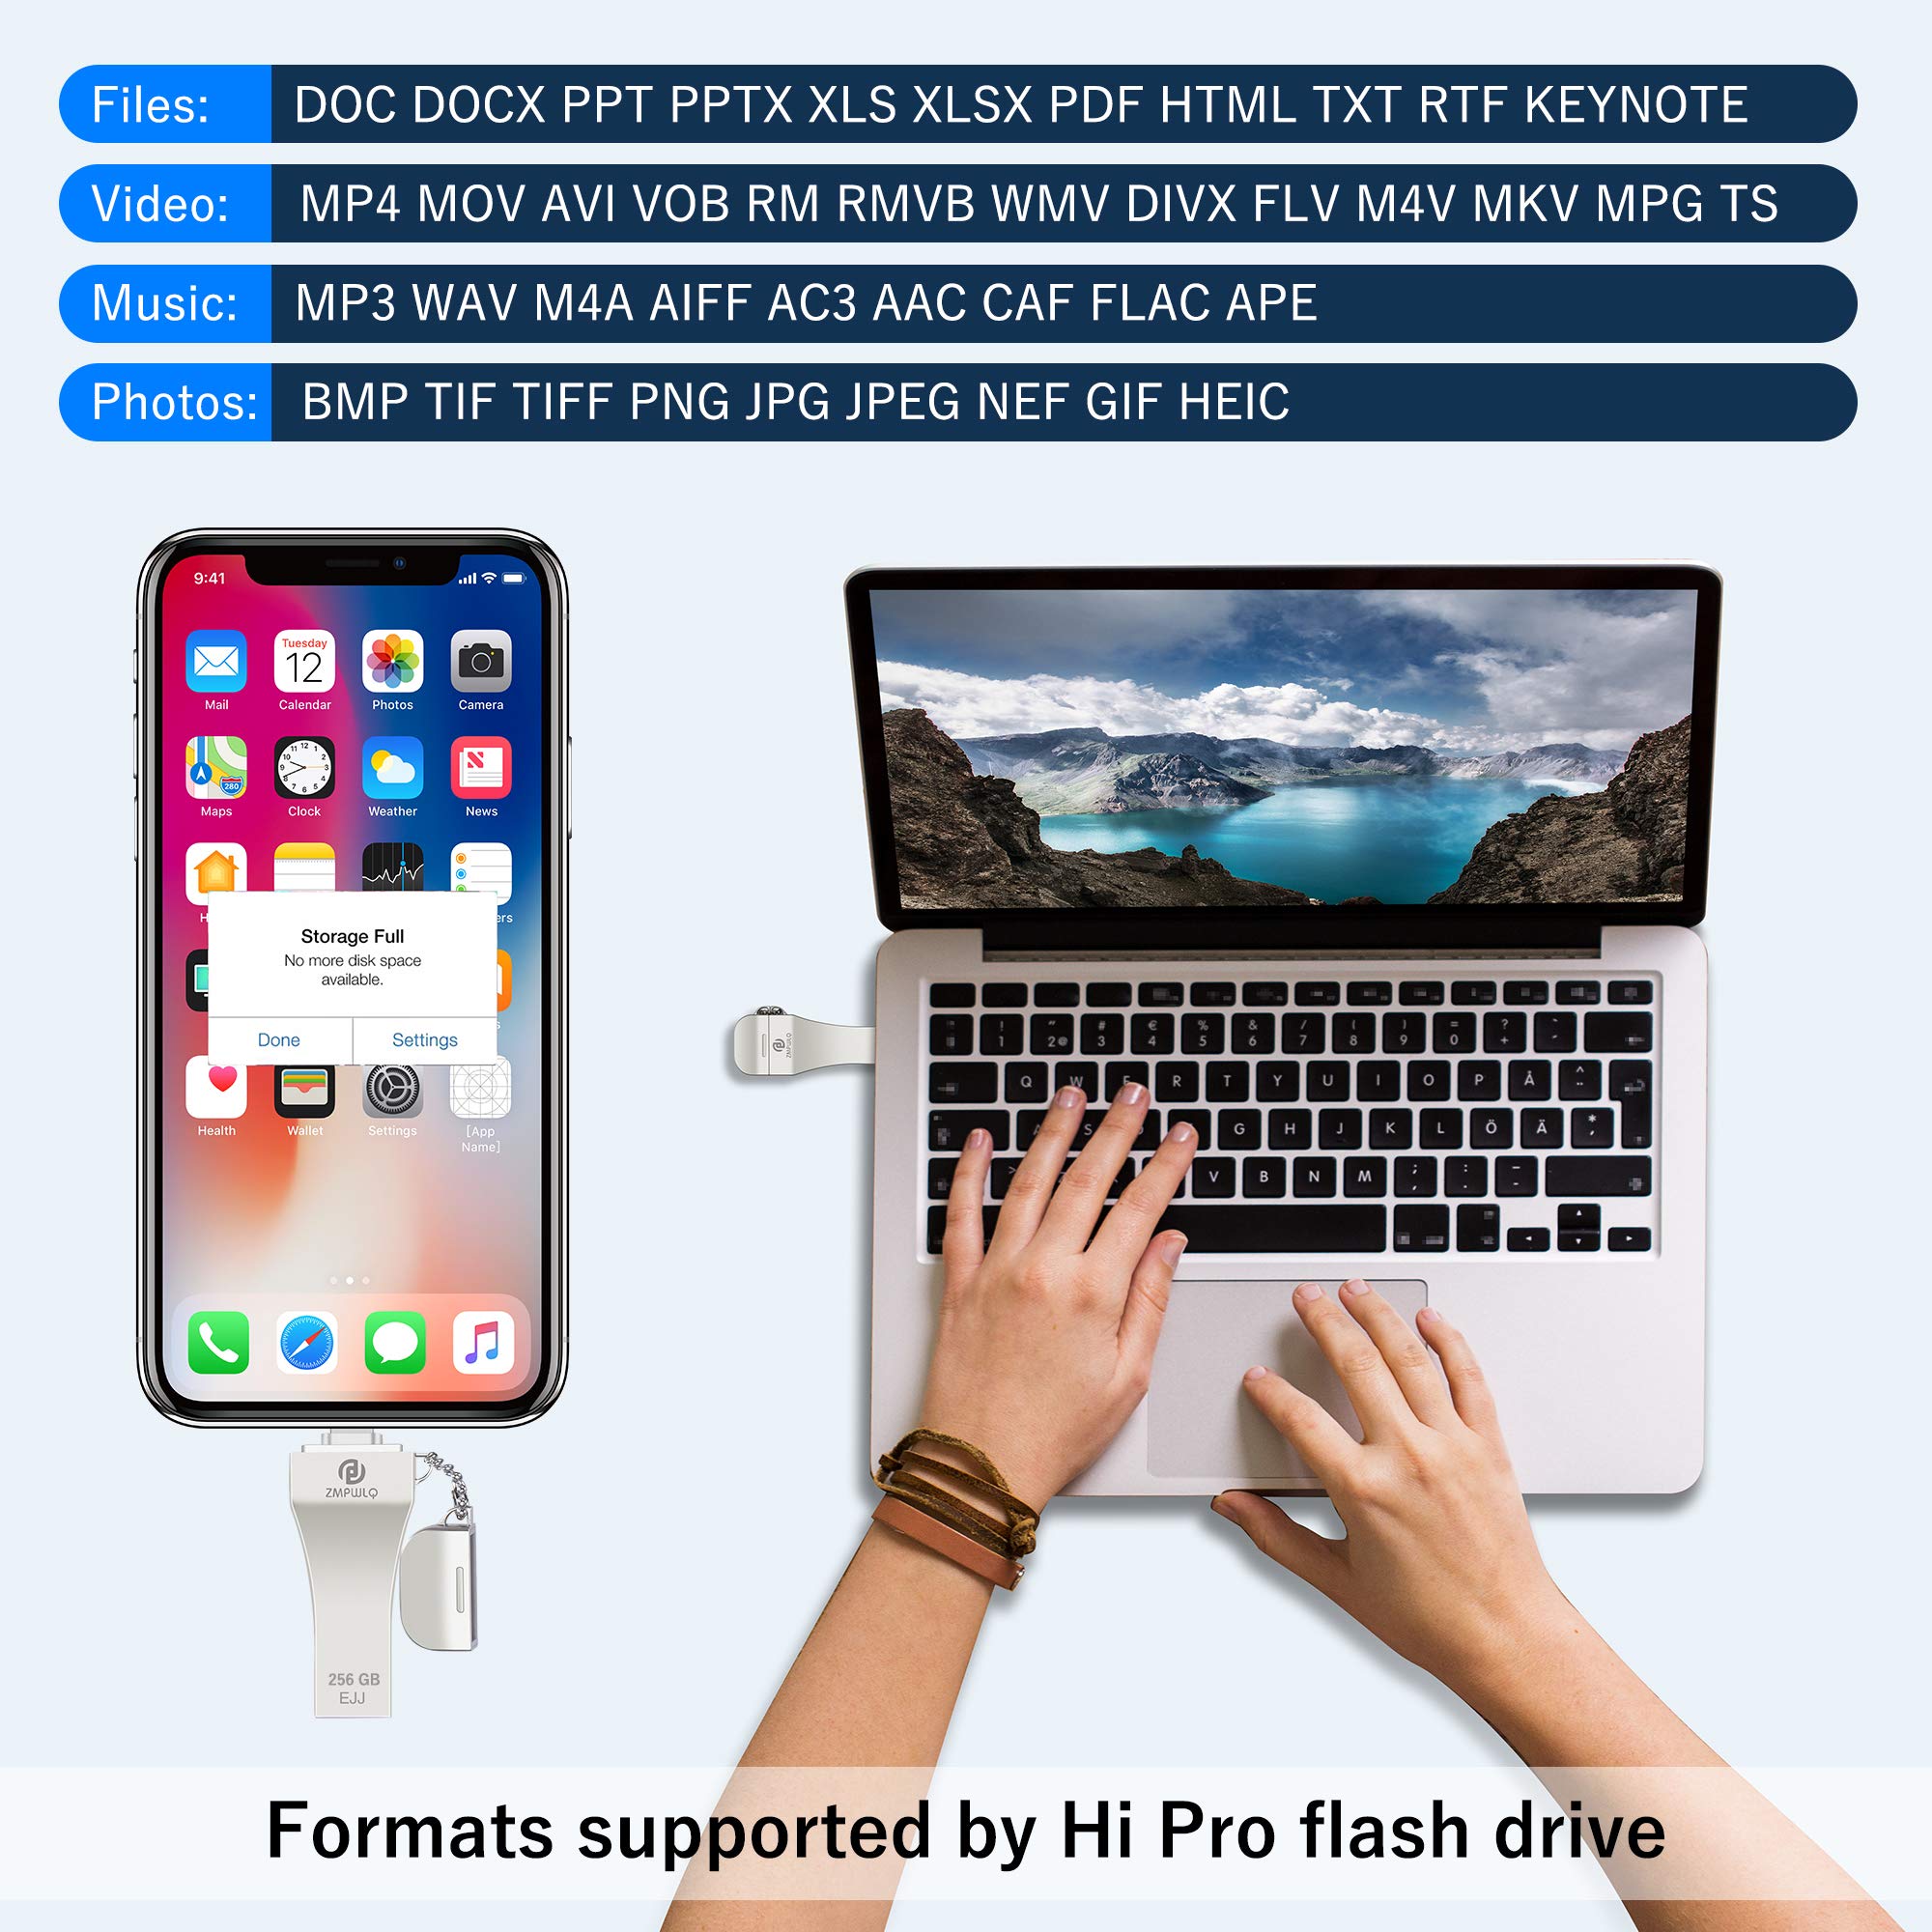 Apple MFi Certified 256GB Photo-Stick for iPhone External-iPhone-Storage iPhone-USB-Flash-Drive iPad Backup-Photo-Storage iPad USB-Thumb-Drive Data Transfer Device Memory Stick for iPhone/iPad/PC 1pcs